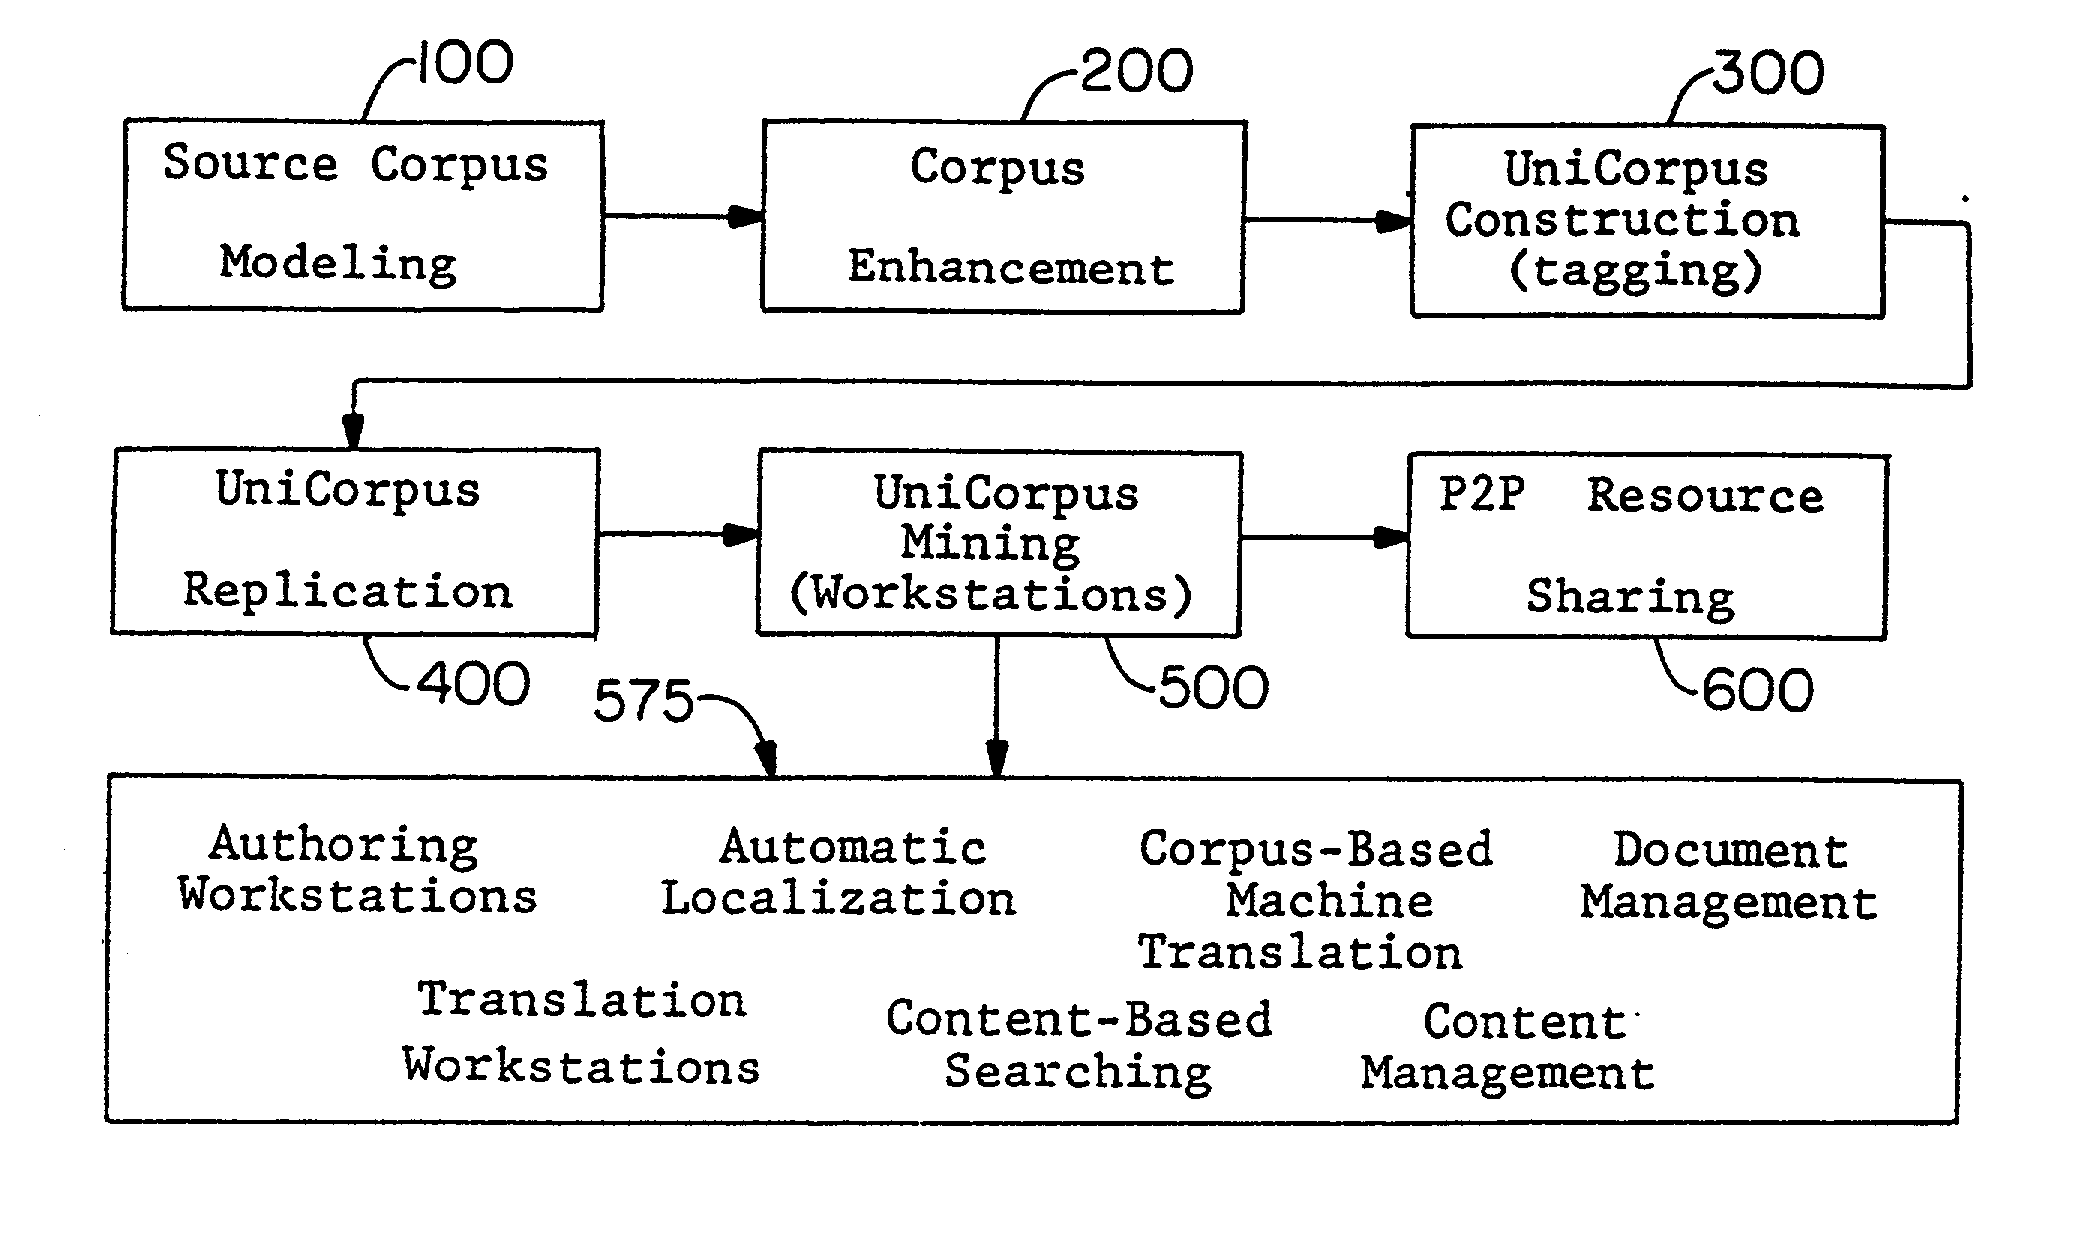 Process for the document management and computer-assisted translation of documents utilizing document corpora constructed by intelligent agents